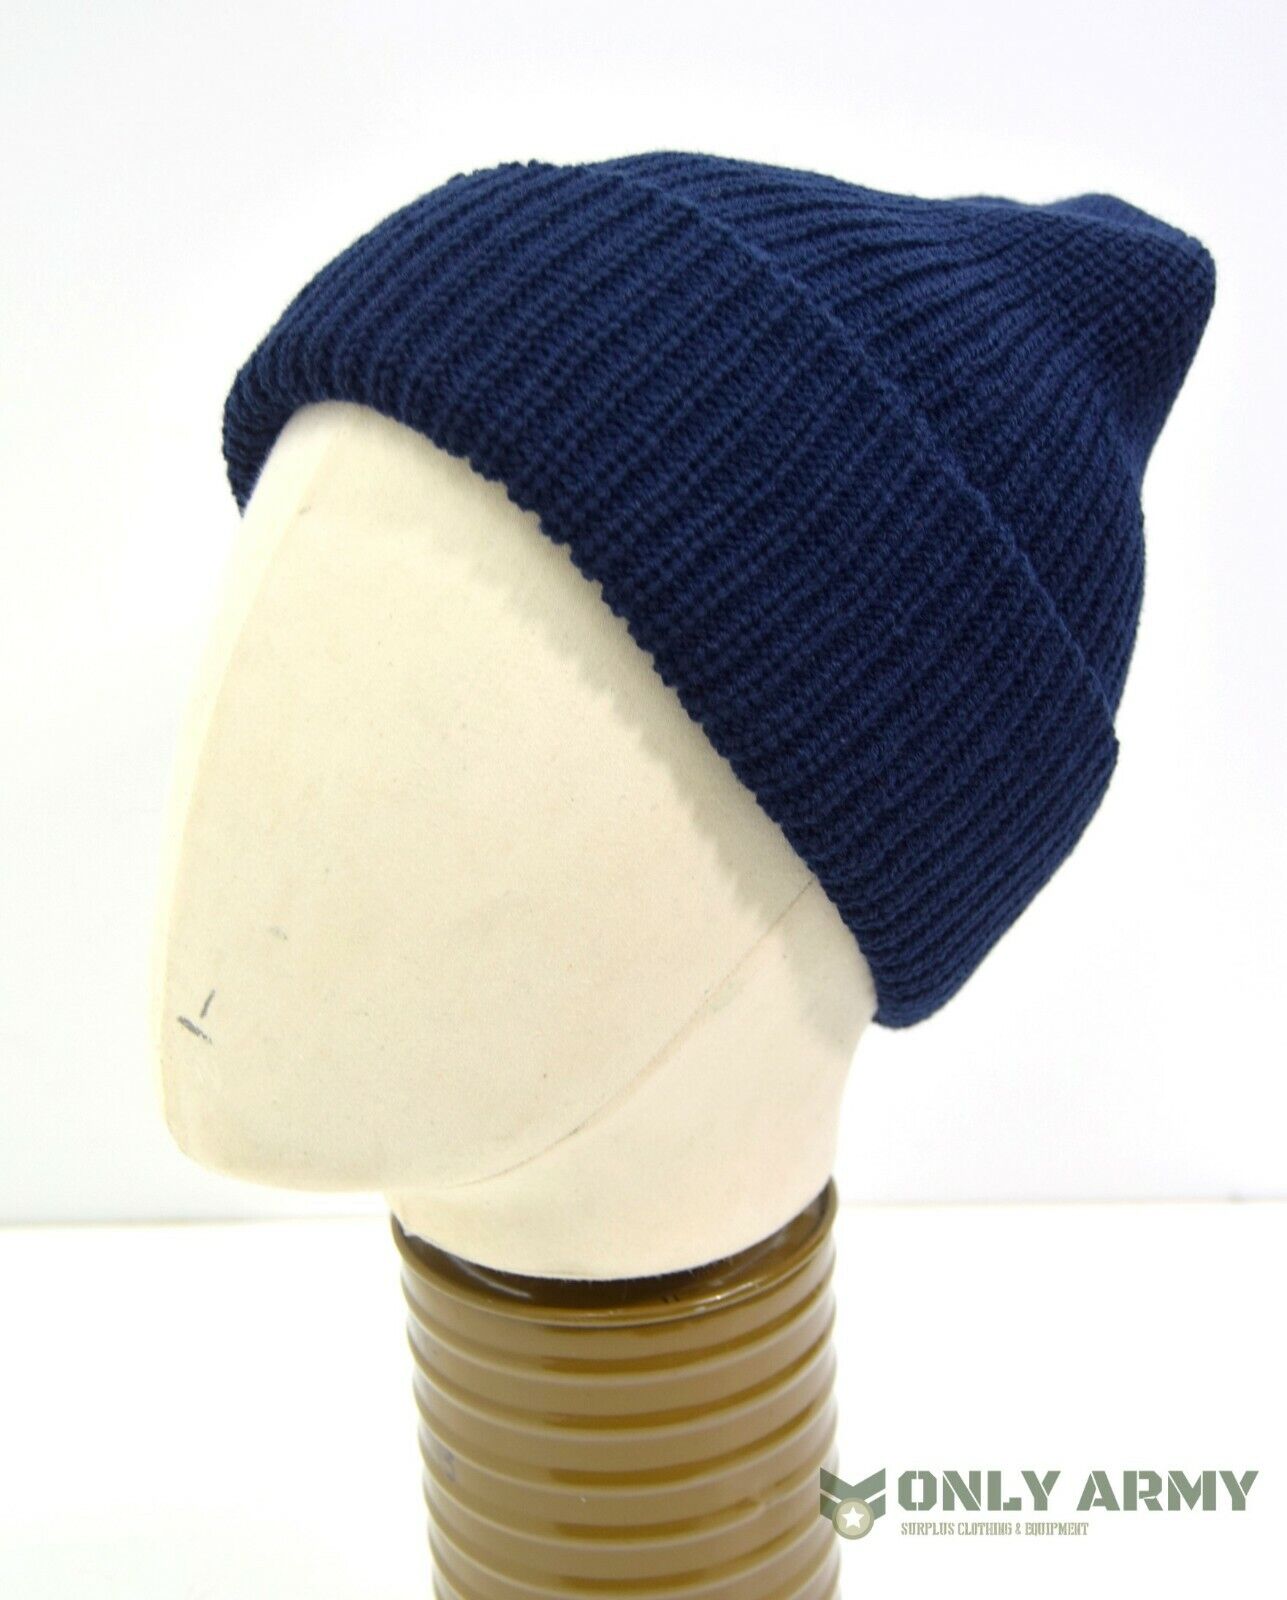 FRENCH ARMY SURPLUS NAVY BEANIE HAT NEW OLD STOCK WATCH CAP WINTER HAT MILITARY